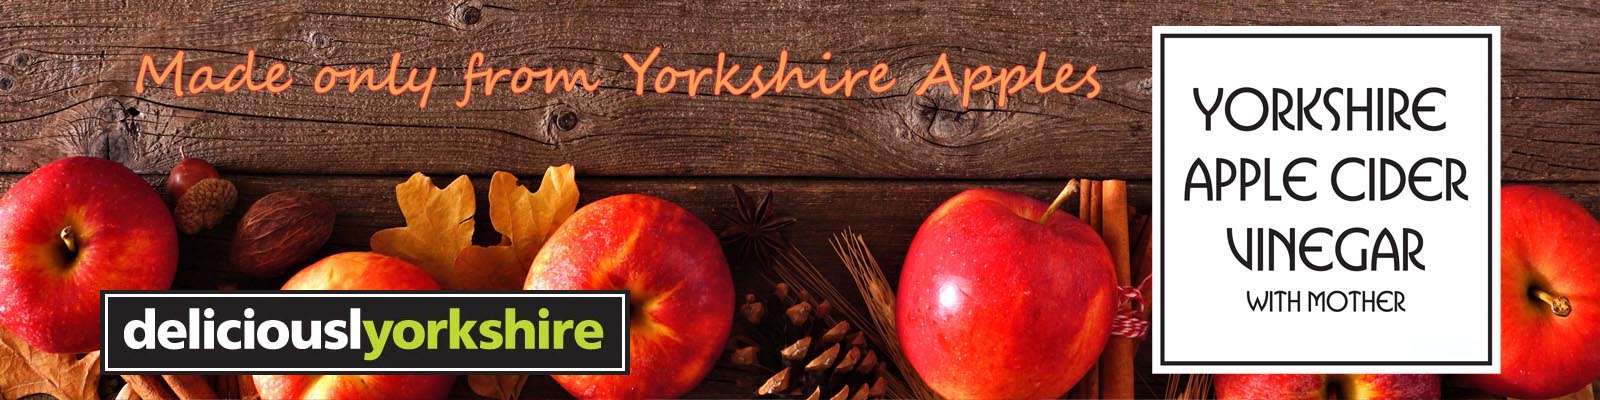 Yorkshire Apples on A Board